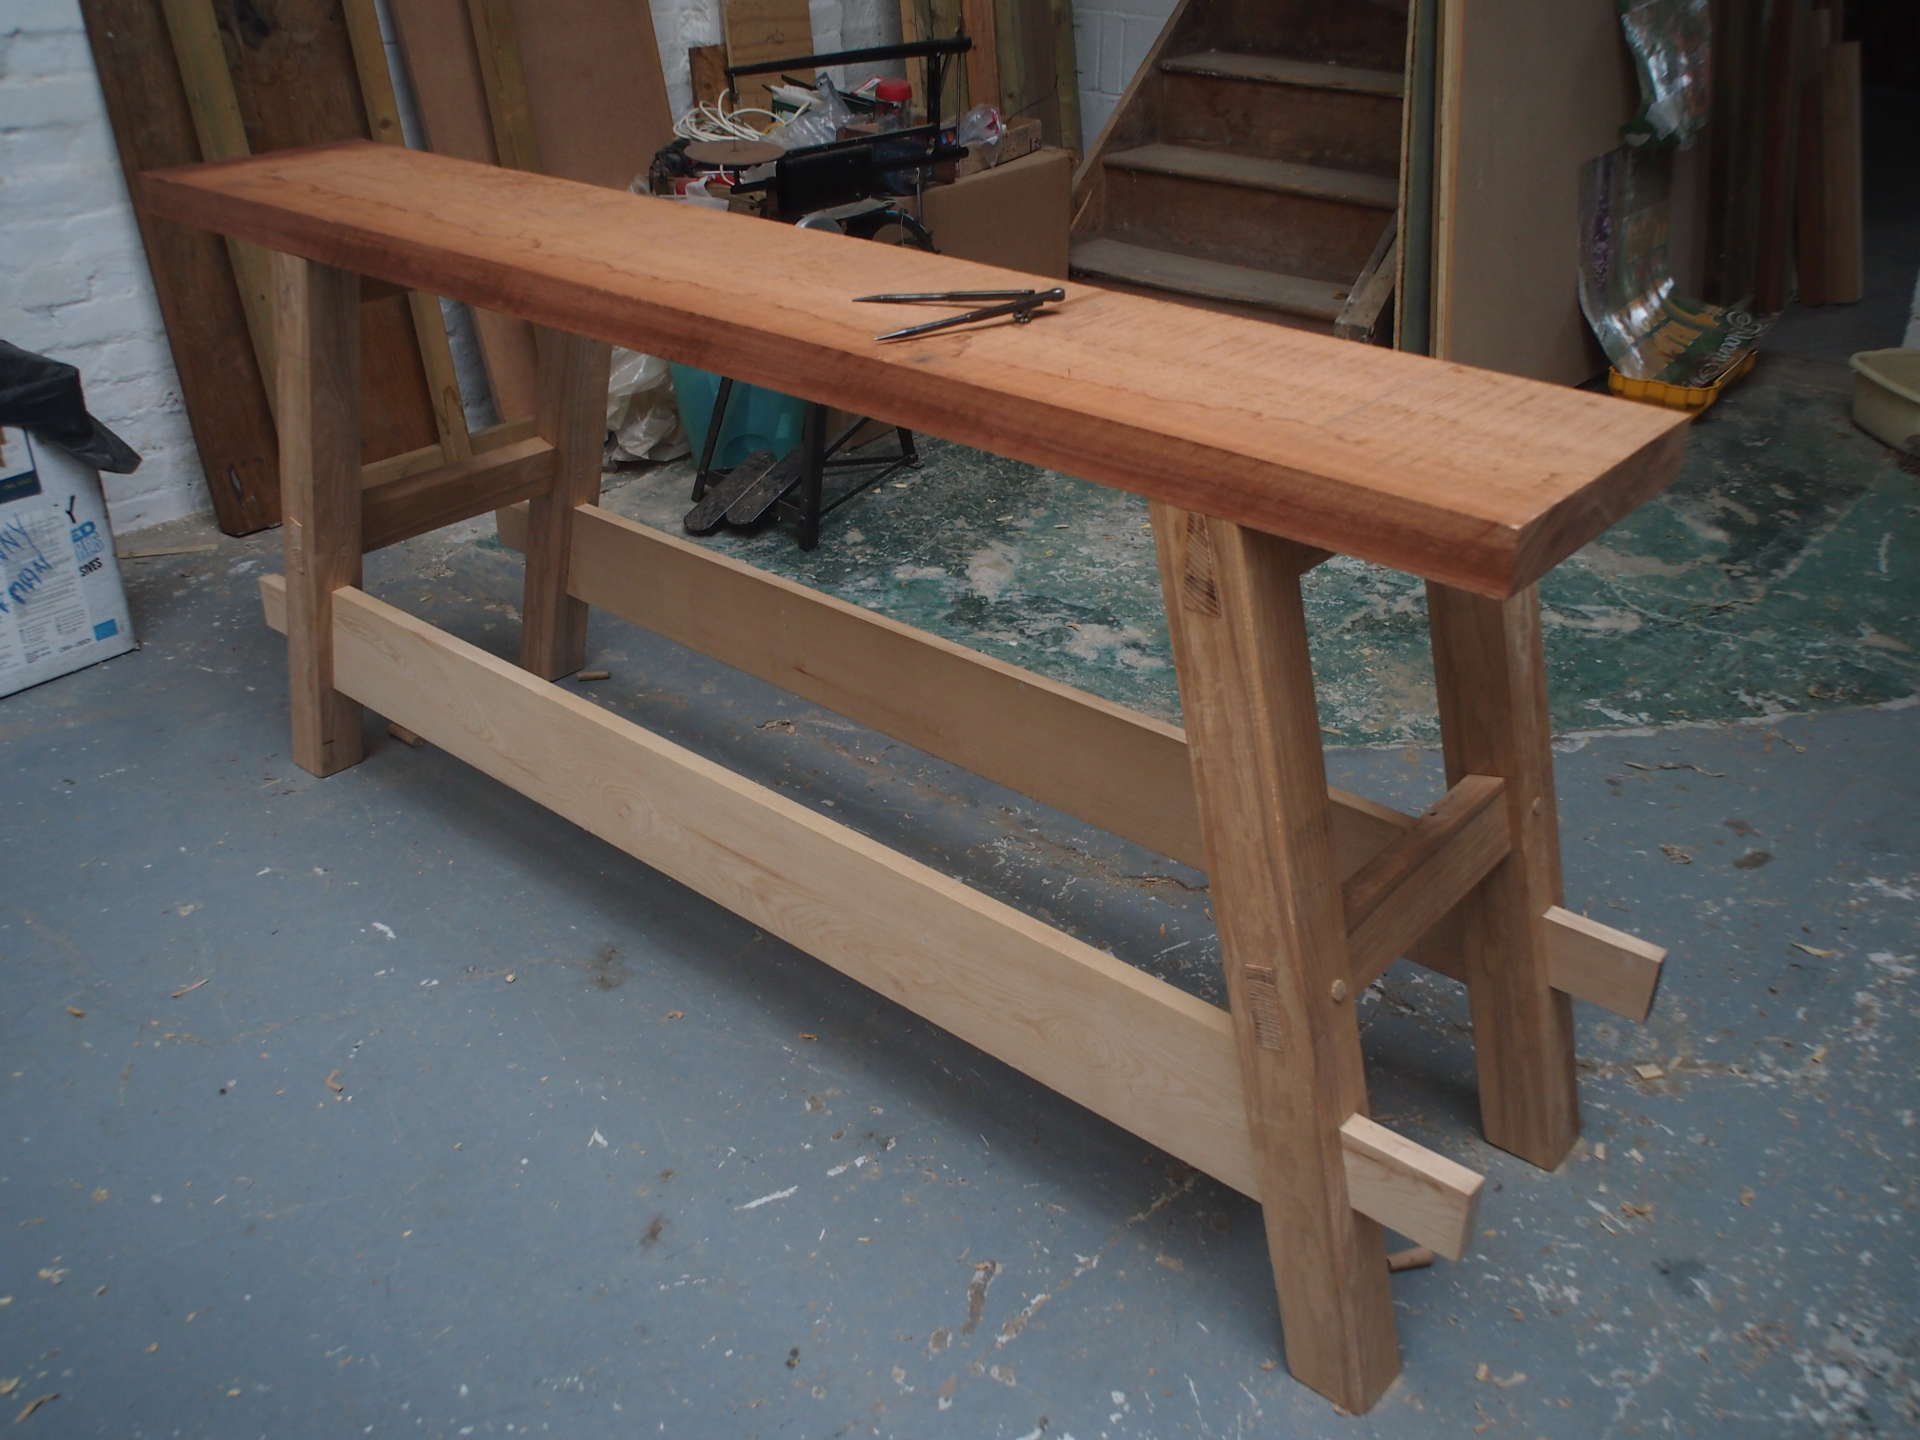 Workbench: the stretchers and top